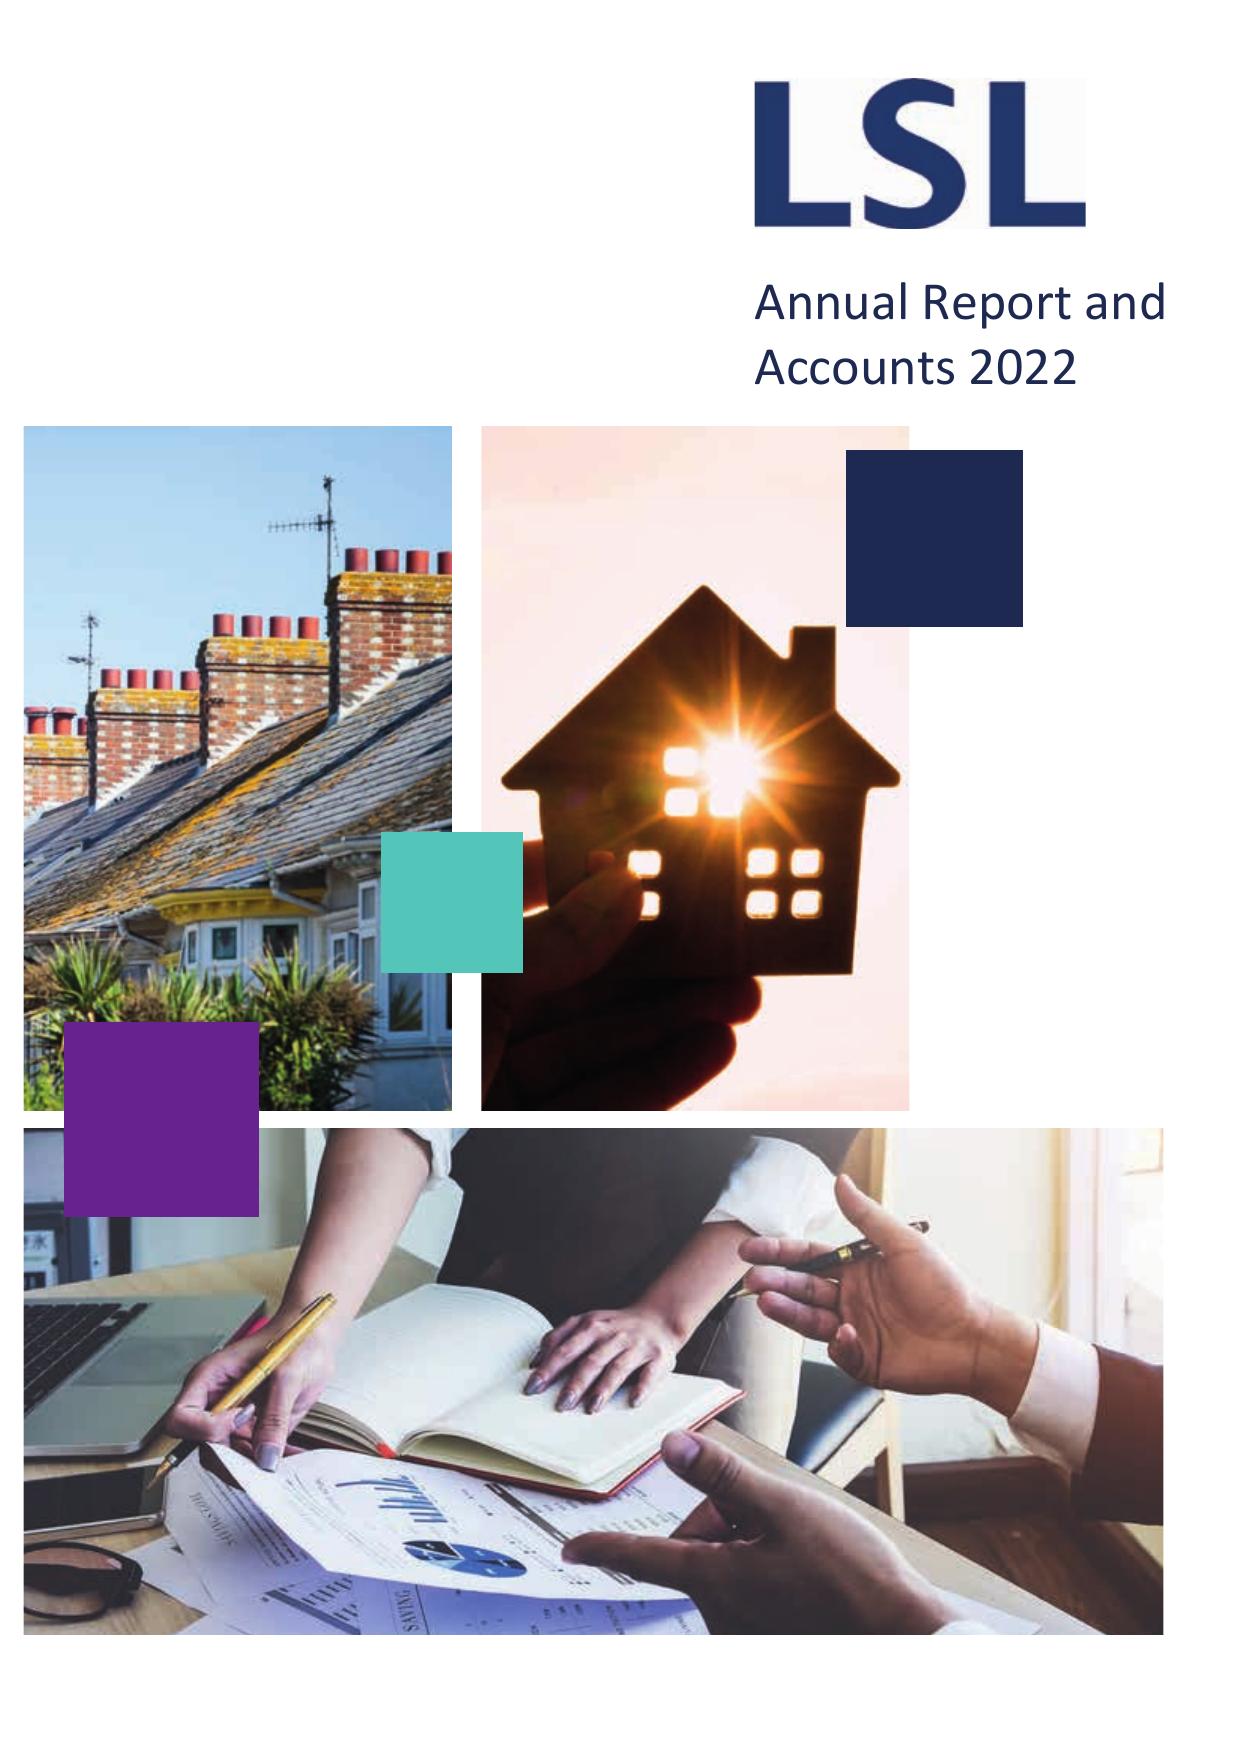 LSLPS 2022 Annual Report